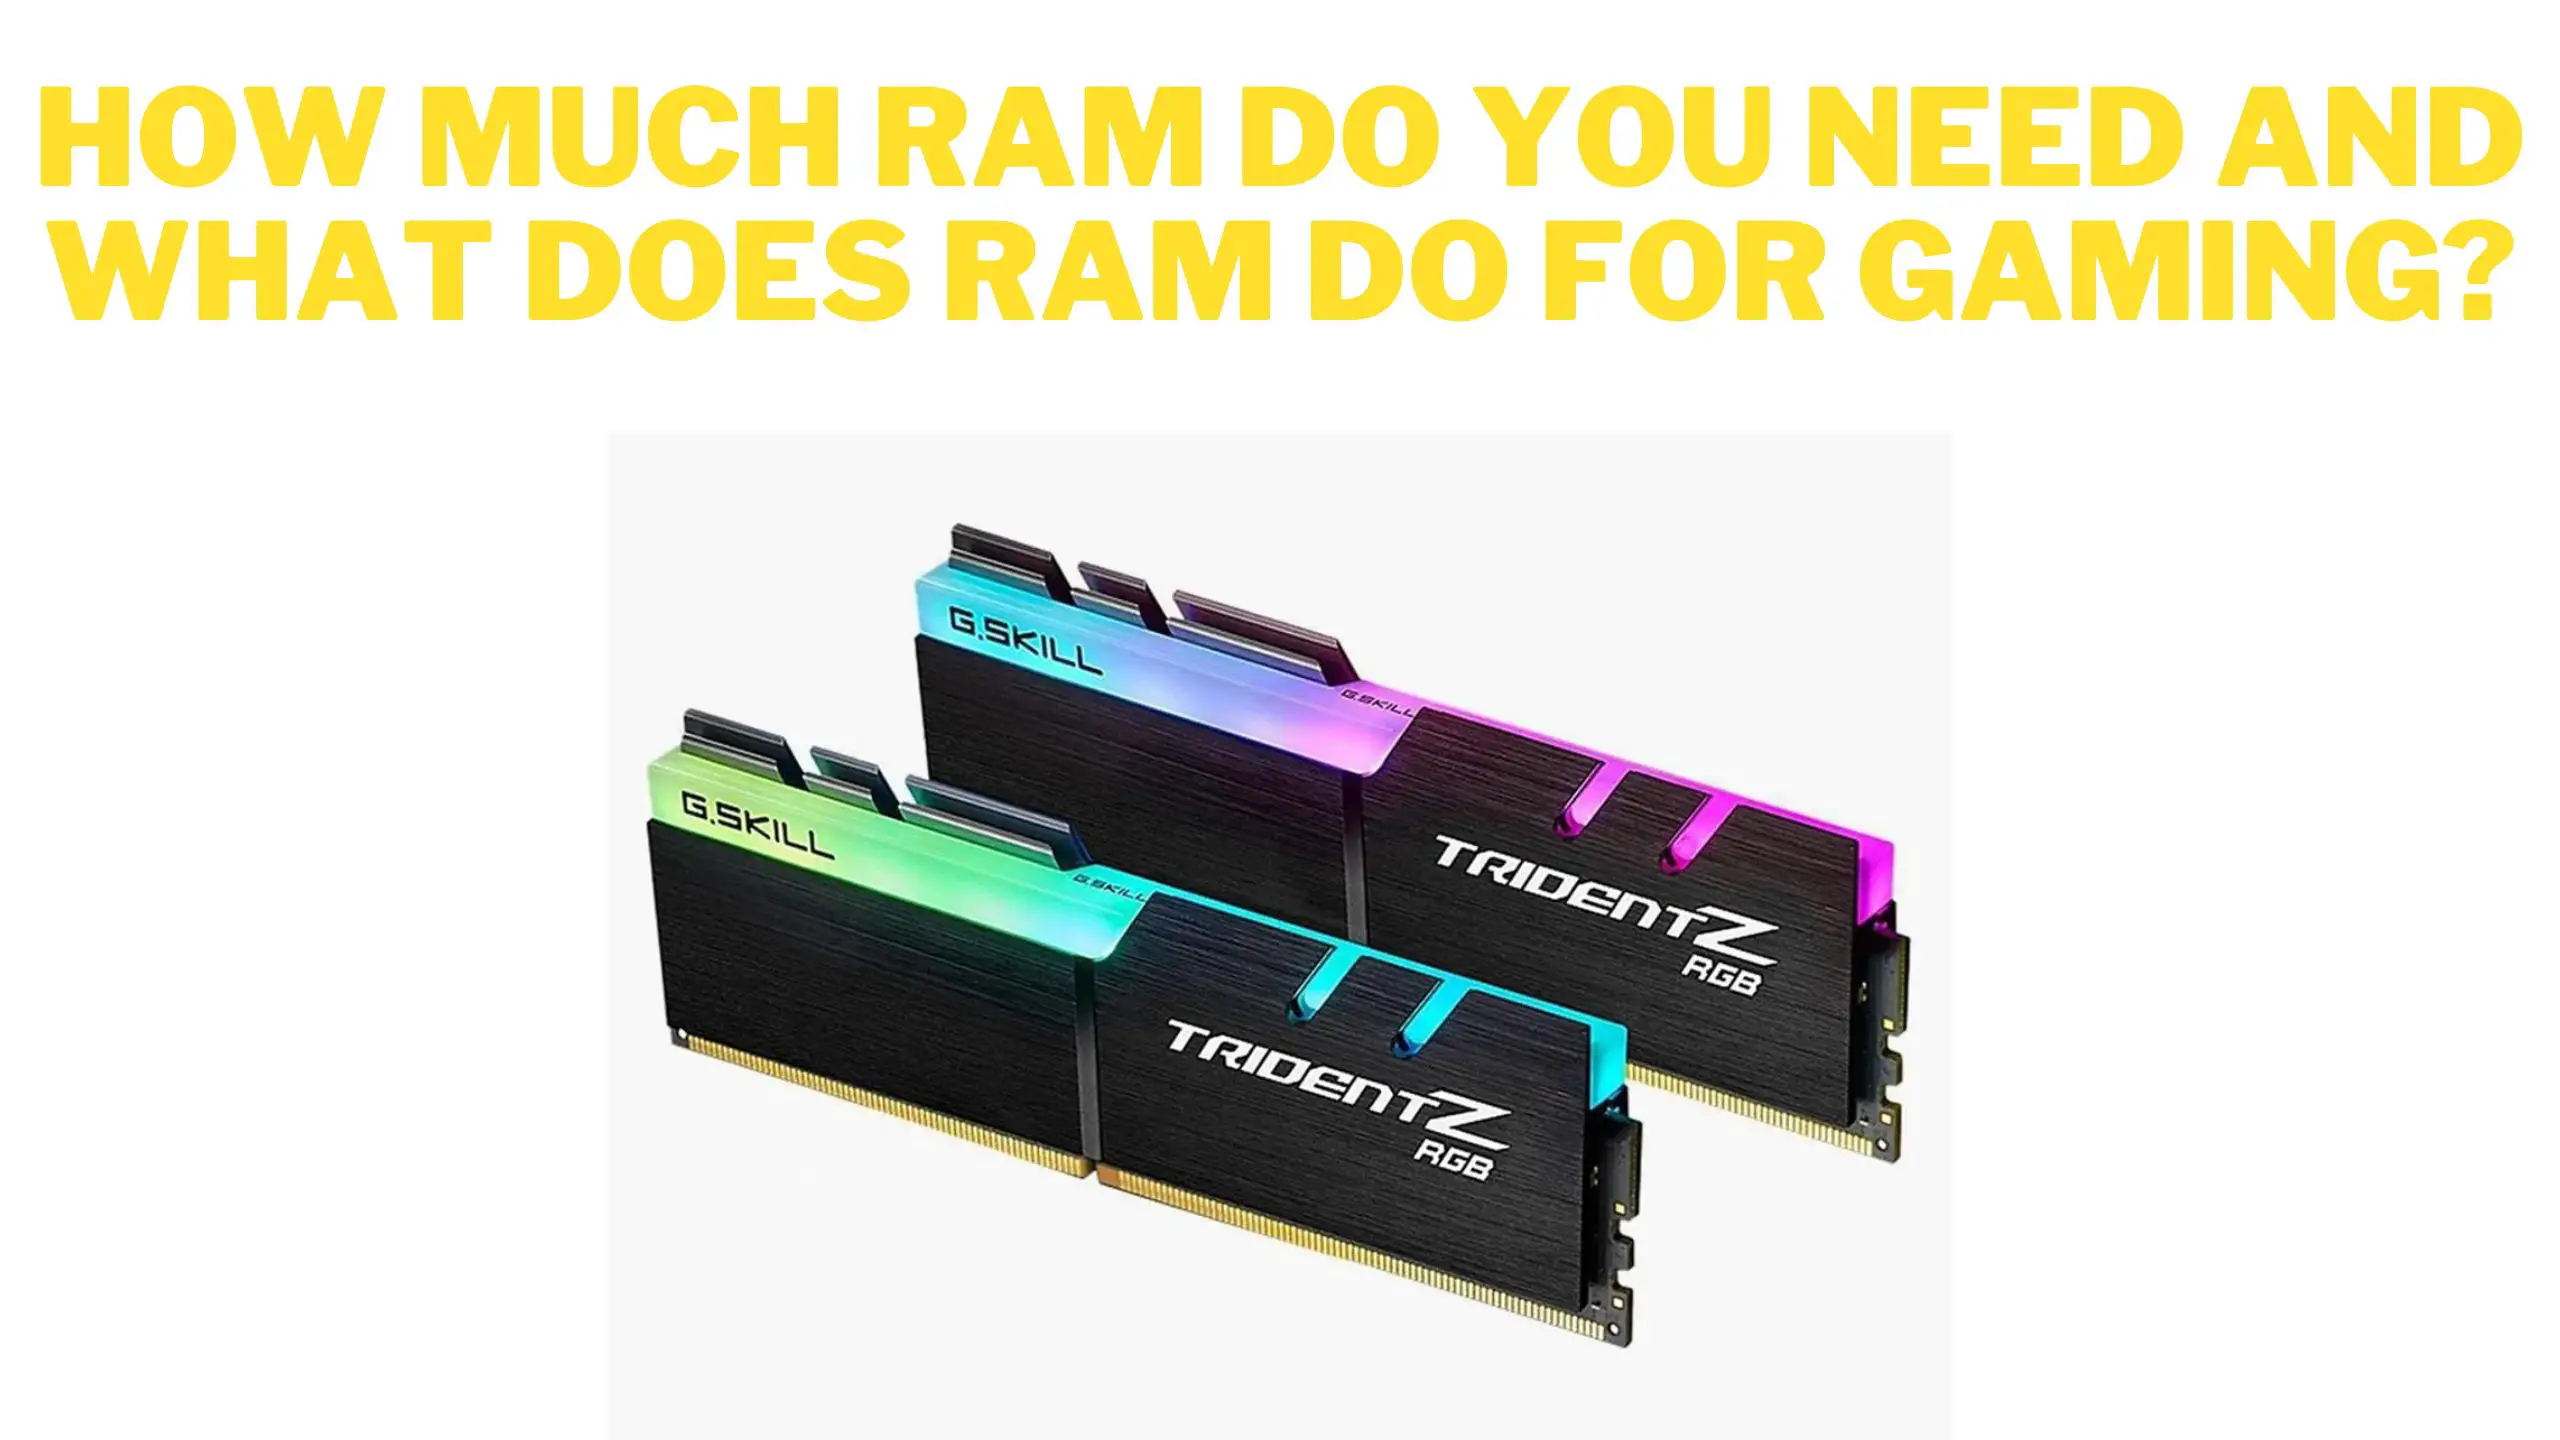 How Much RAM Do you Need and What Does RAM Do for Gaming